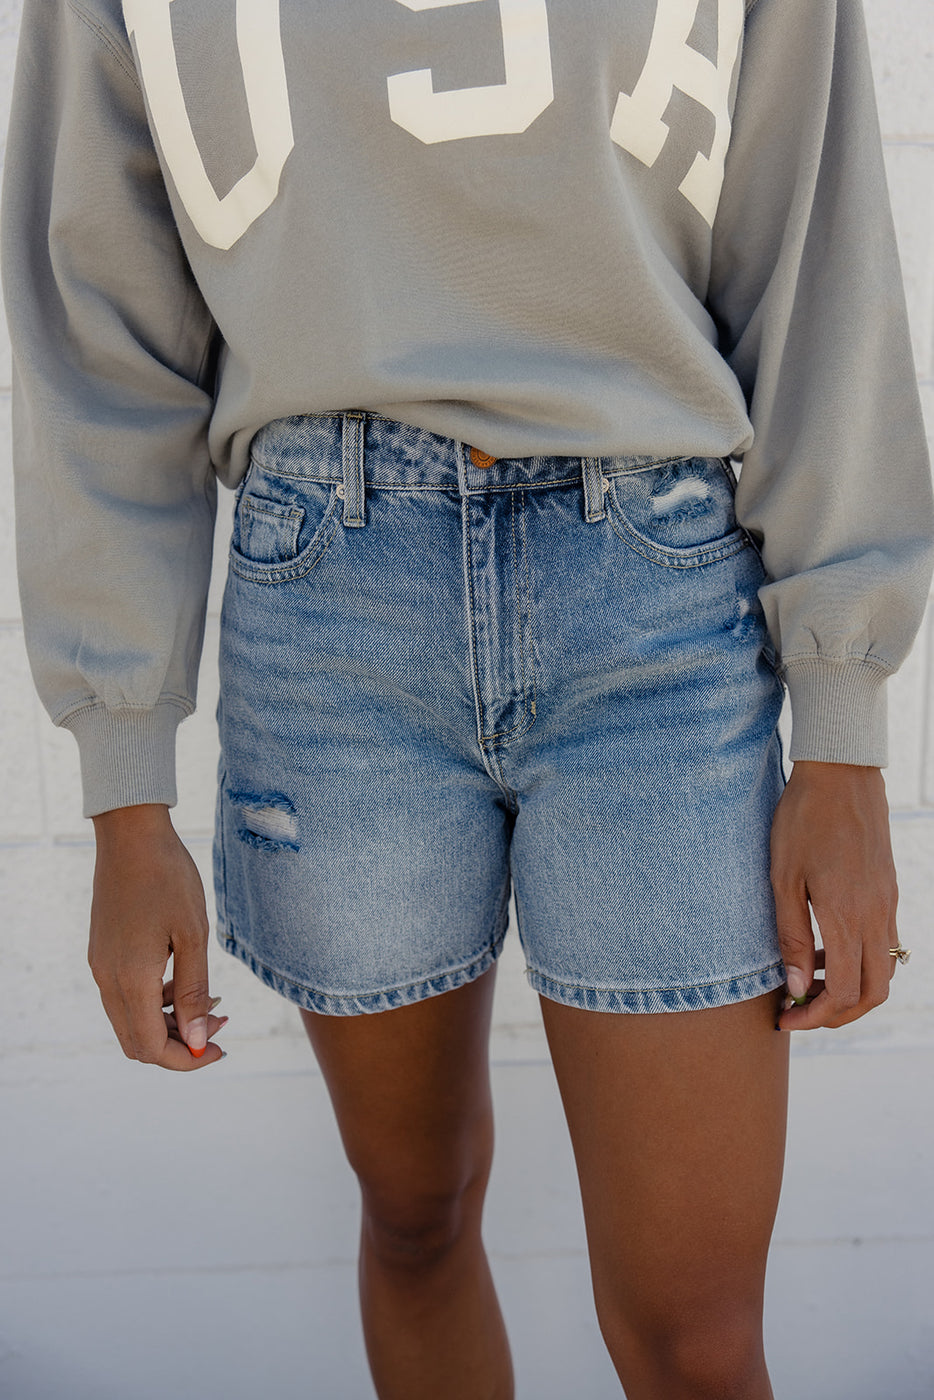 a person wearing blue jean shorts